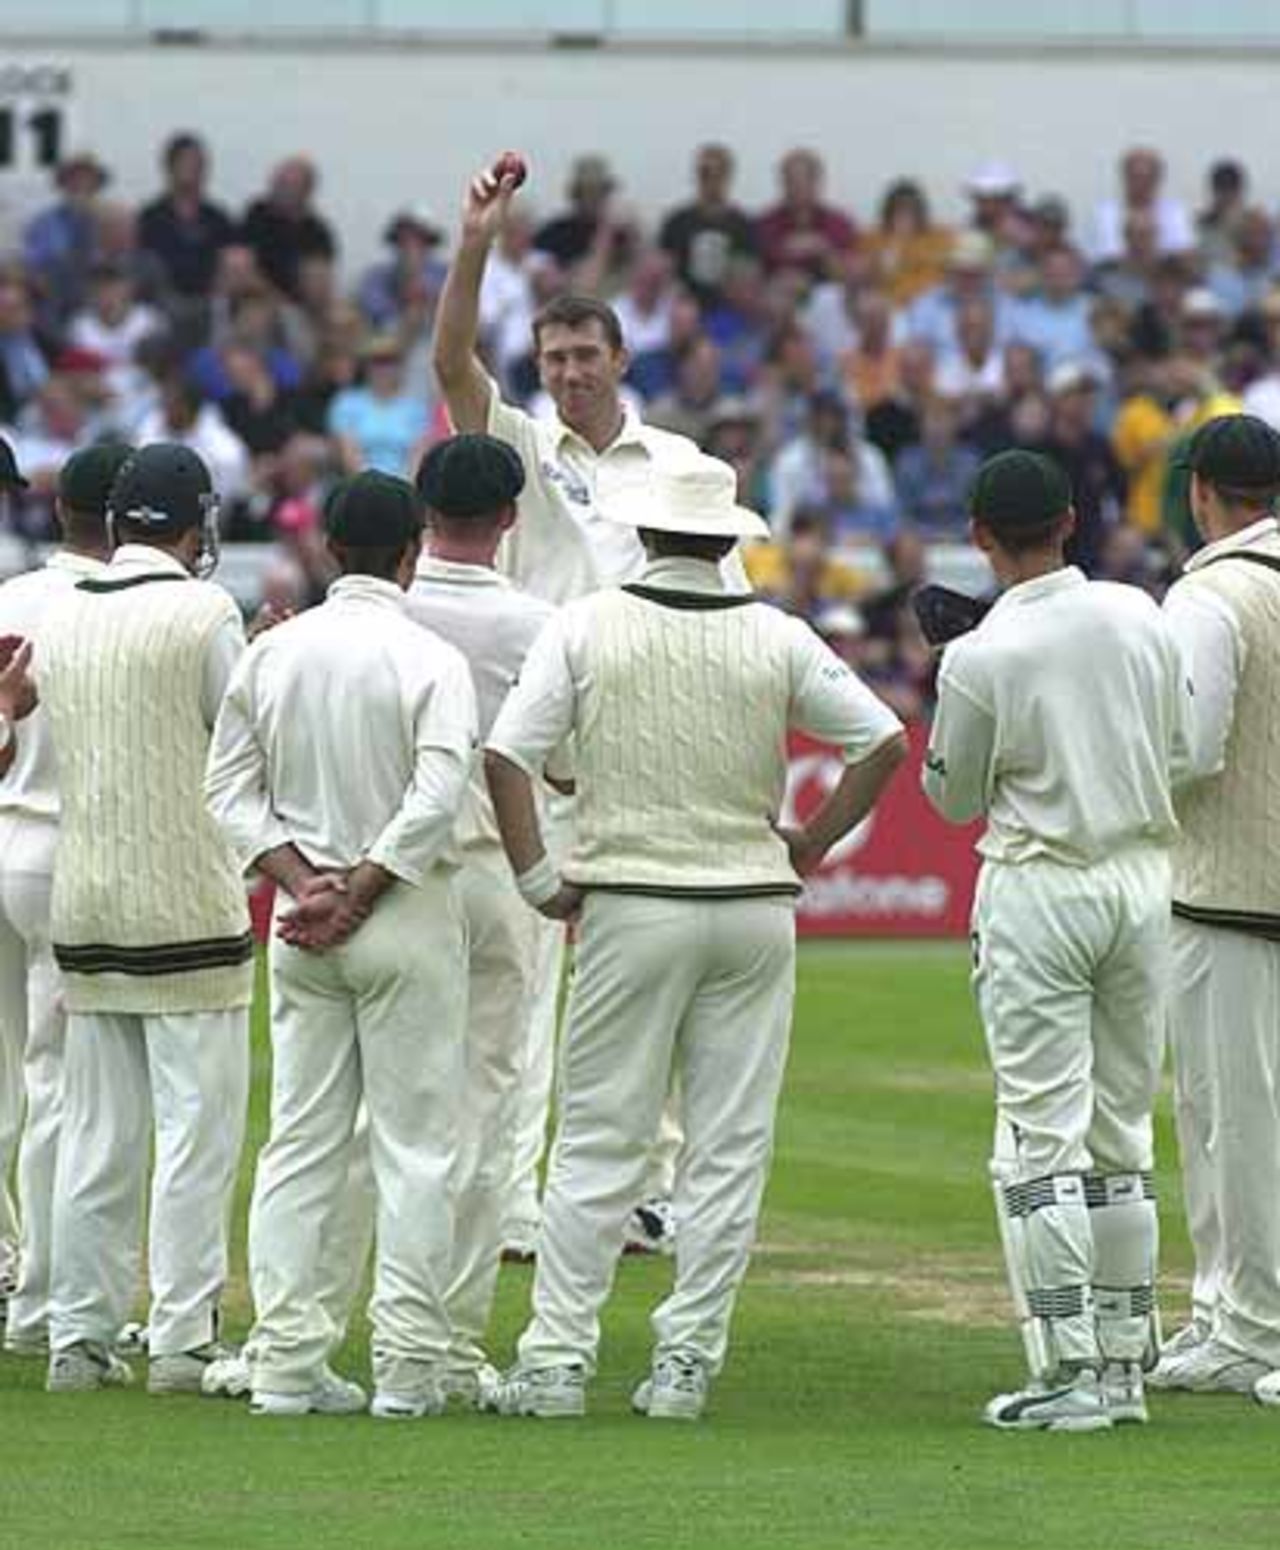 Another 5 wicket haul for Glenn McGrath, England v Australia, The Ashes 4th npower Test, Leeds, 16-20 Aug 2001